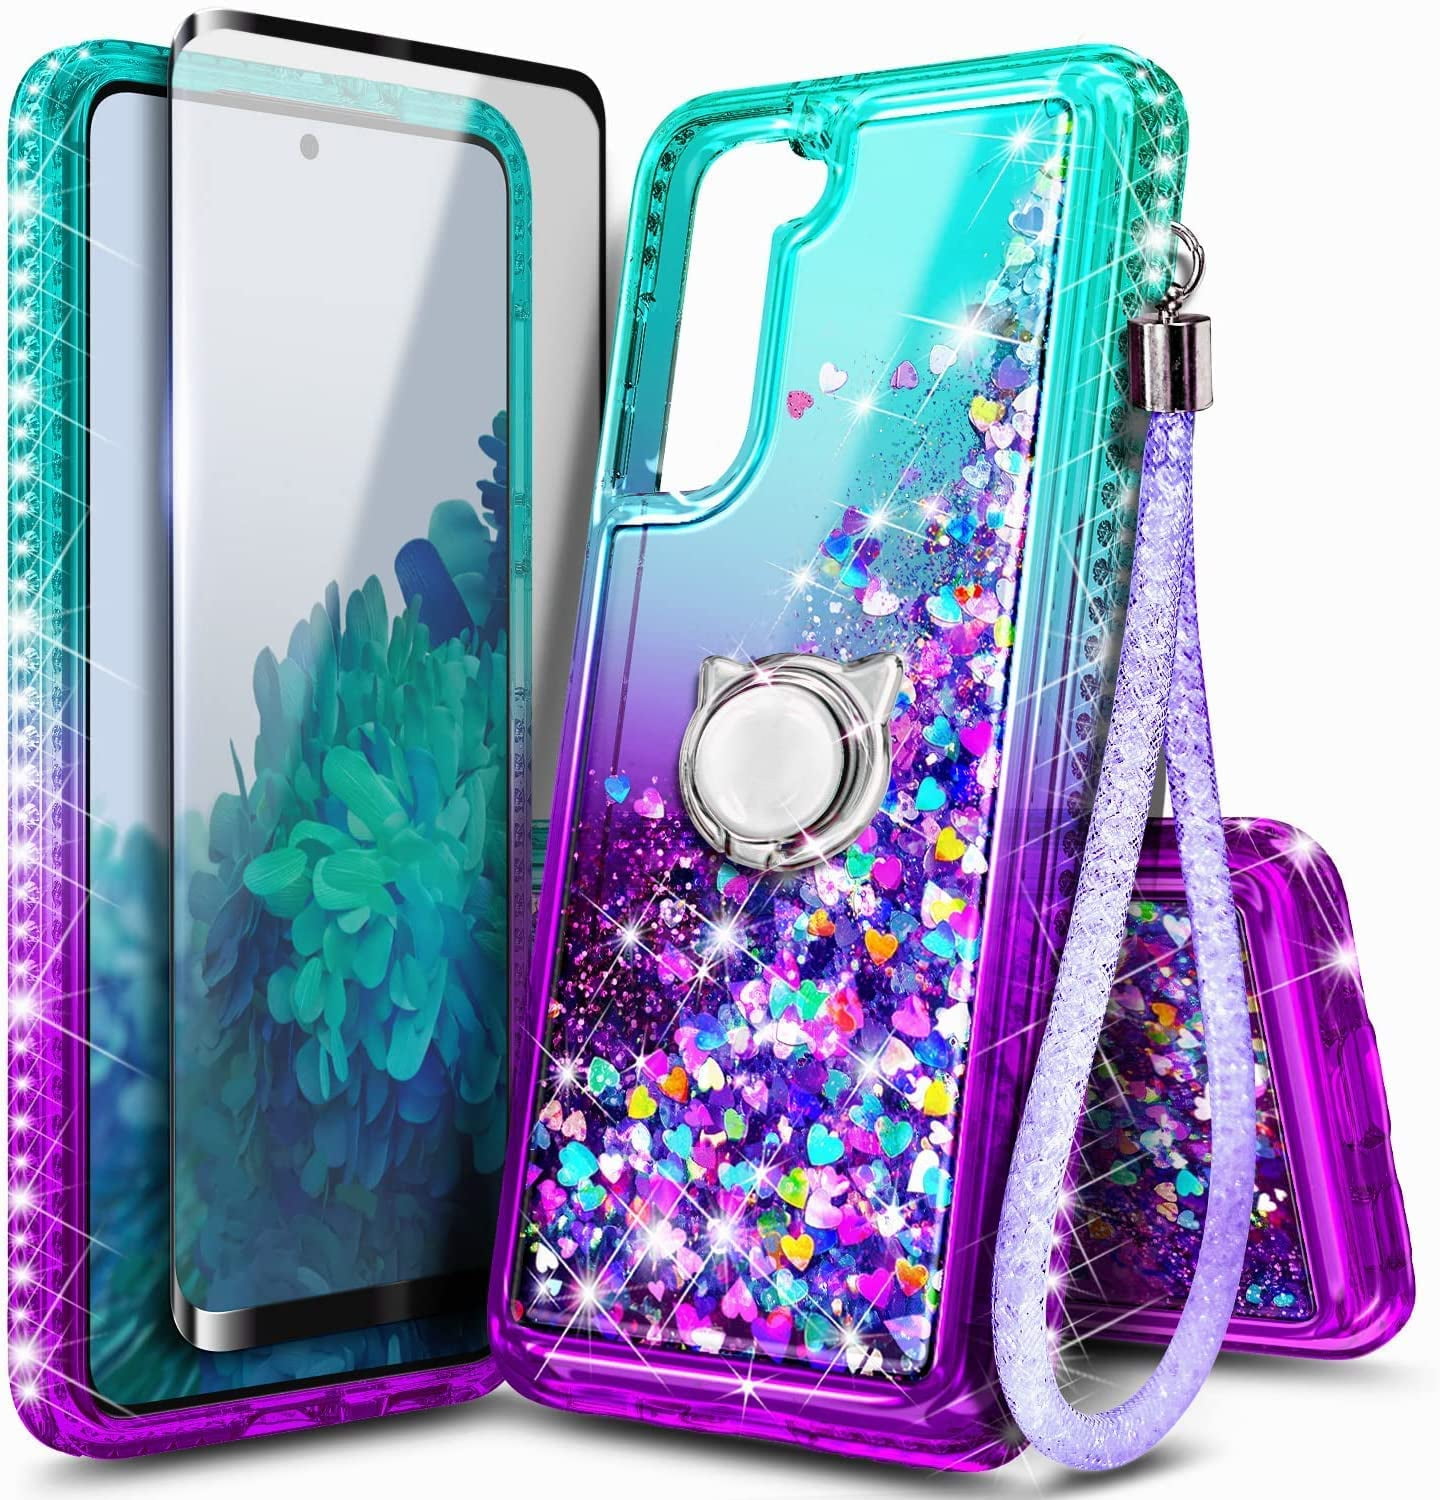  Lastma Samsung Galaxy S21 [NOT Plus] Case Cute with Wrist Strap  Kickstand S21 Case 5g Glitter Bling Cartoon IMD Soft TPU Shockproof  Protective Phone Cases Cover for Girls and Women 